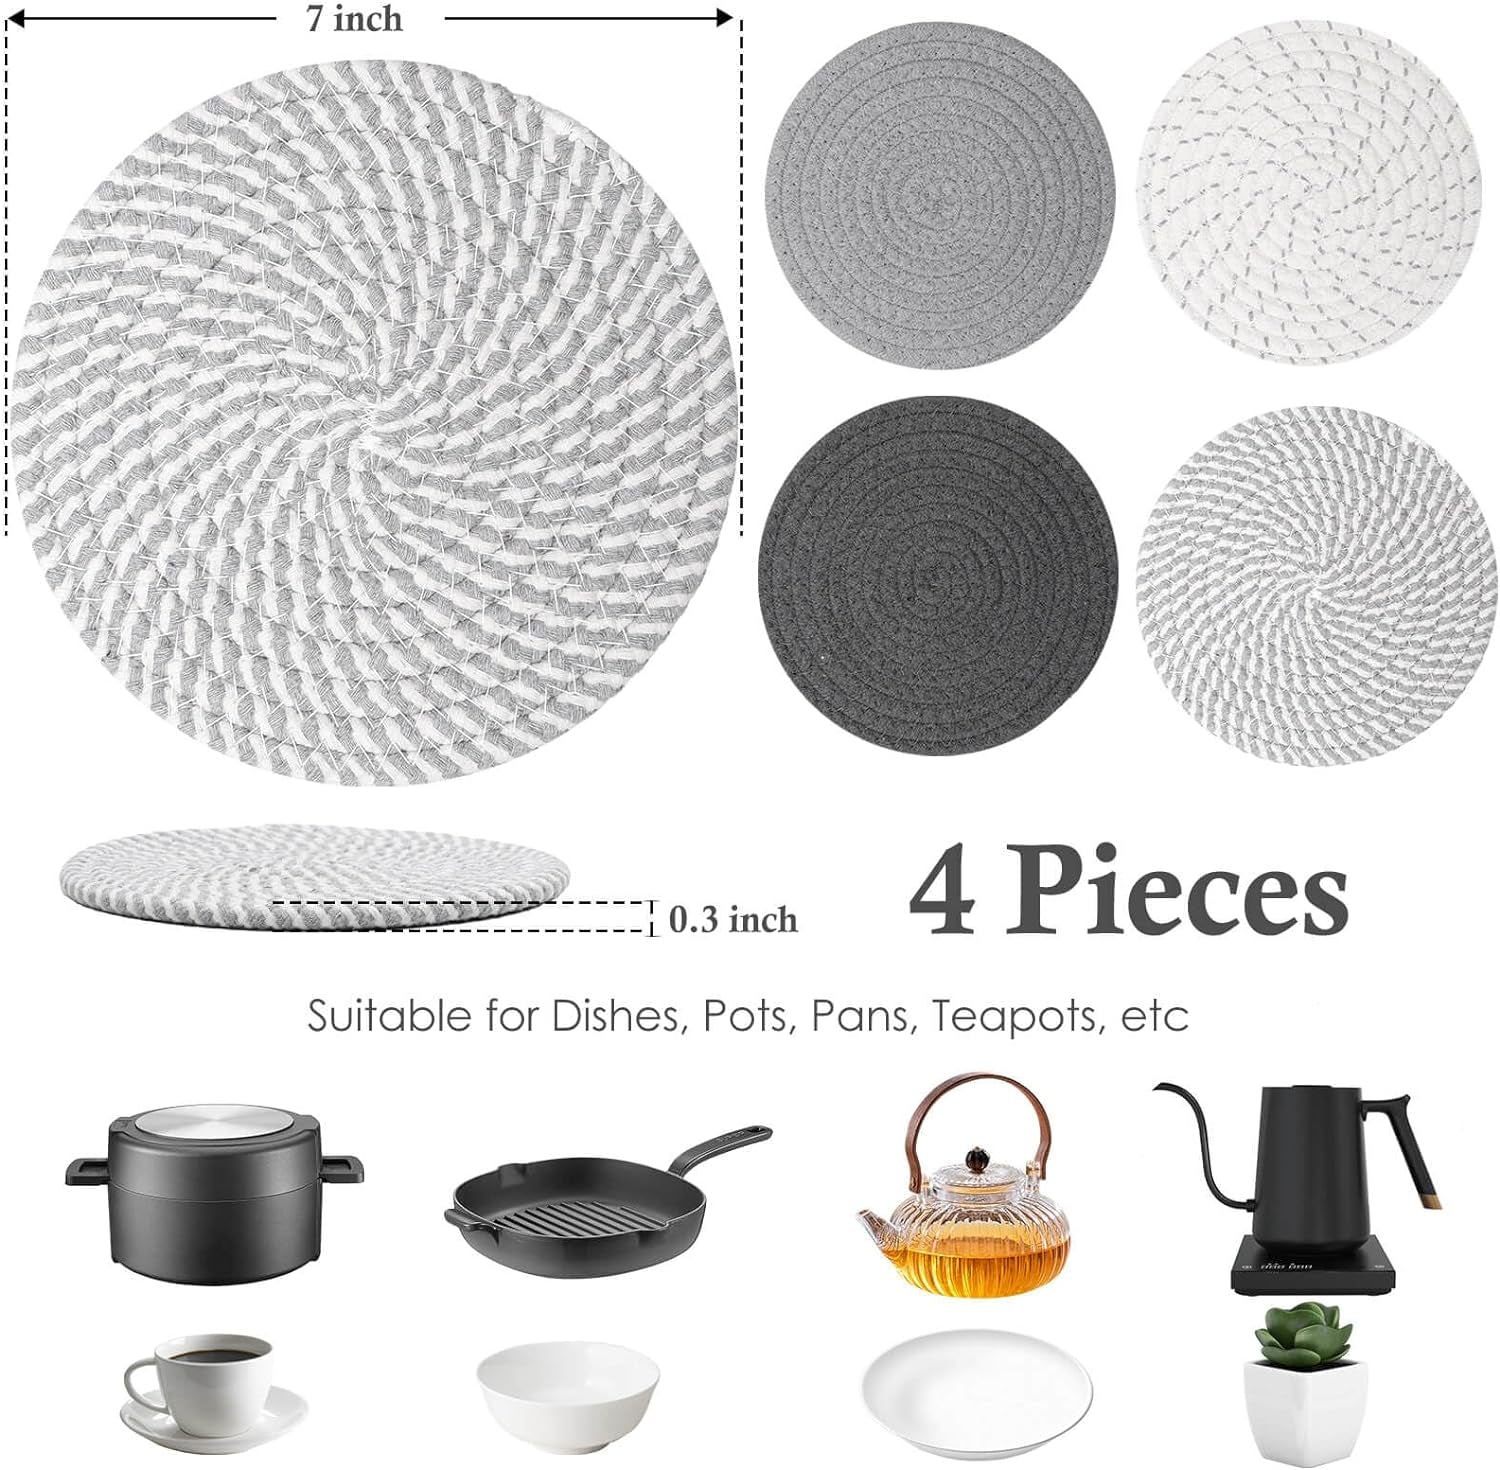 7" Trivets for Hot Dishes, Hot Pots and Pans, 4 Heat Resistant Hot Pads, Pot Holders for Kitchen, Hot Plate Mats for Kitchen Countertops, Table, Home Essentials for New Home and Farmhouse Decor